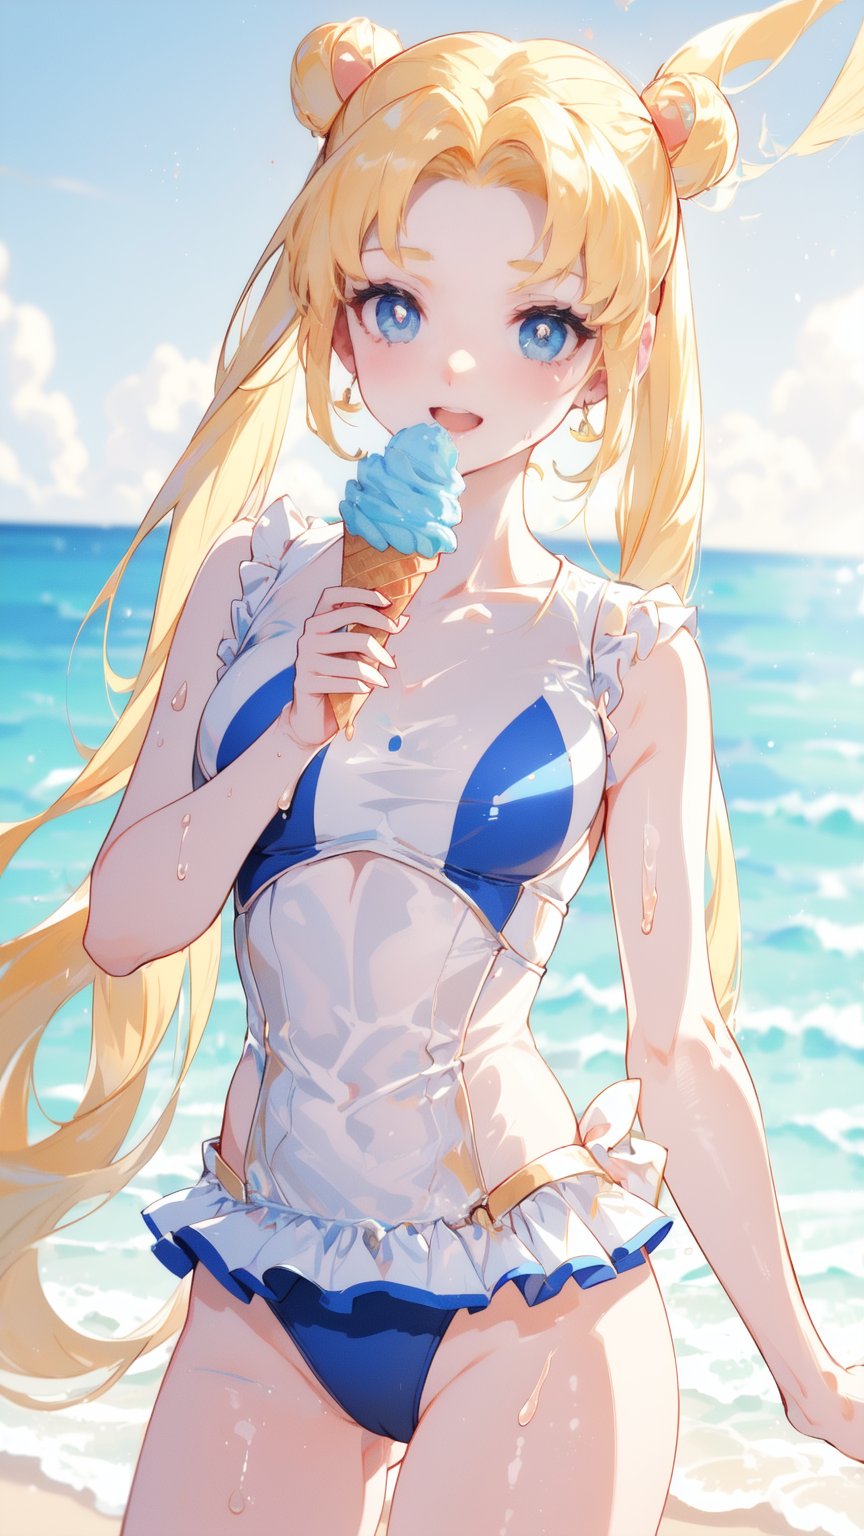 ((1 girl)), ((blue eyes)), (golden hair), (pigtails hairstyle),  (Charming smile), ((eating soft serve ice cream with tongue)), ((sexy design swimsuits)), ultra high resolution, 8k, Hdr, daytime, in the beach, (sweat all over the face)